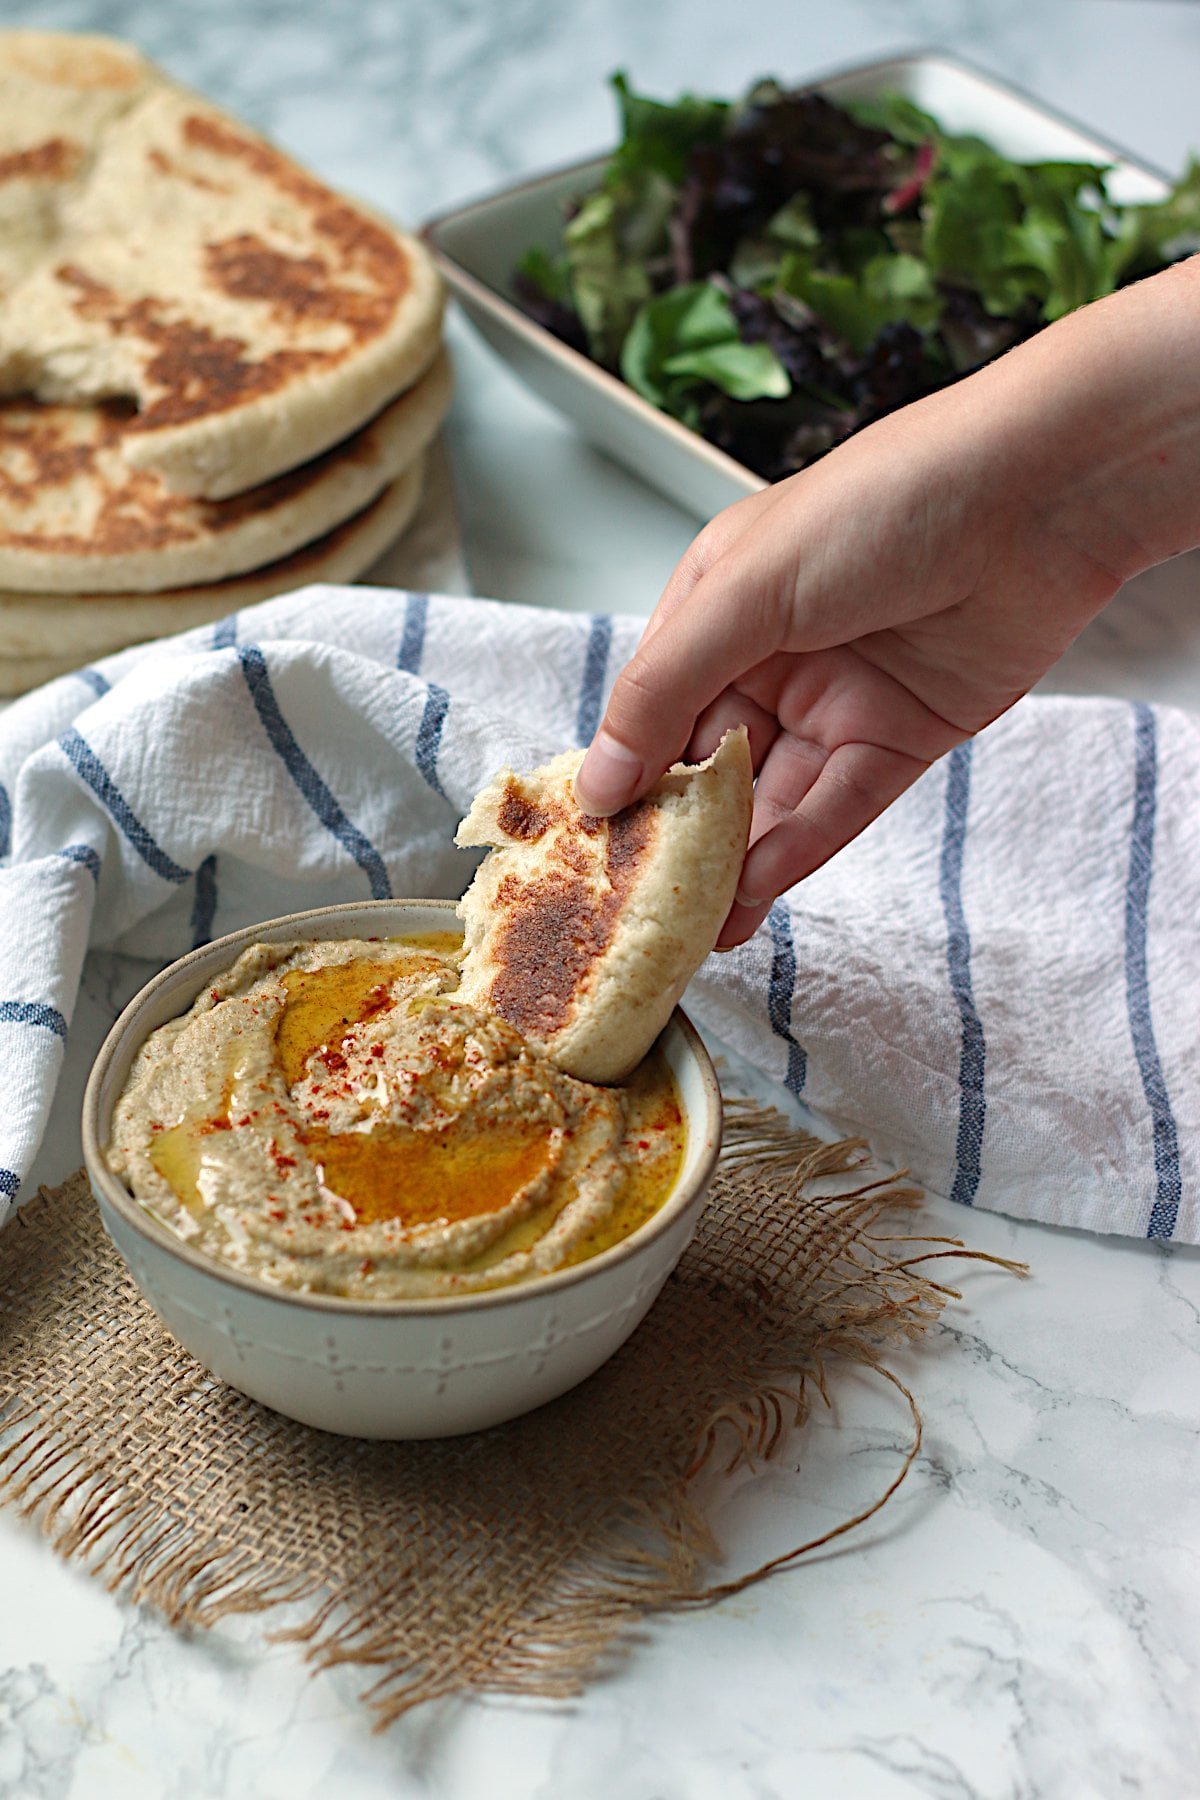 A hand dipping a piece of flatbread into a bowl of baba ghanouj.